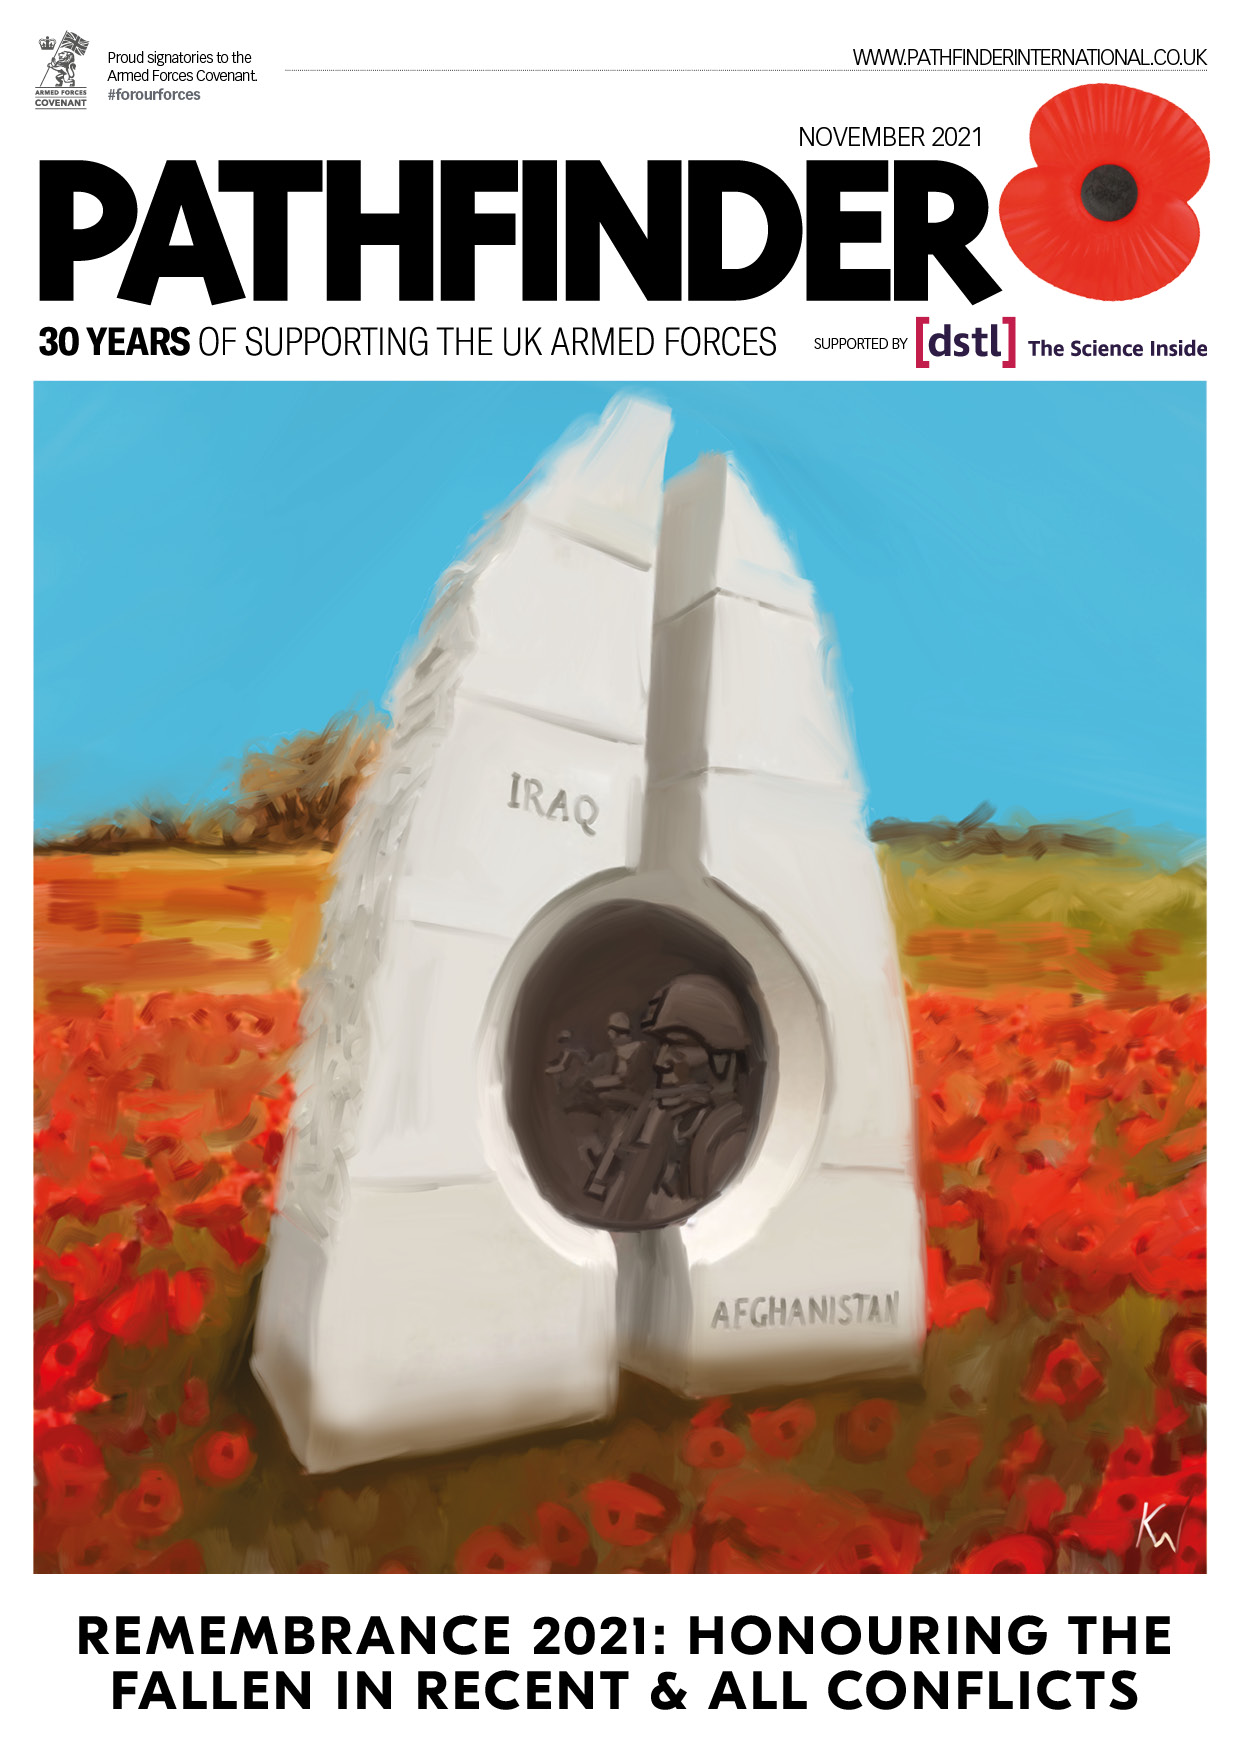 The Remembrance 2021 Special Issue Of Pathfinder Is Out Now!